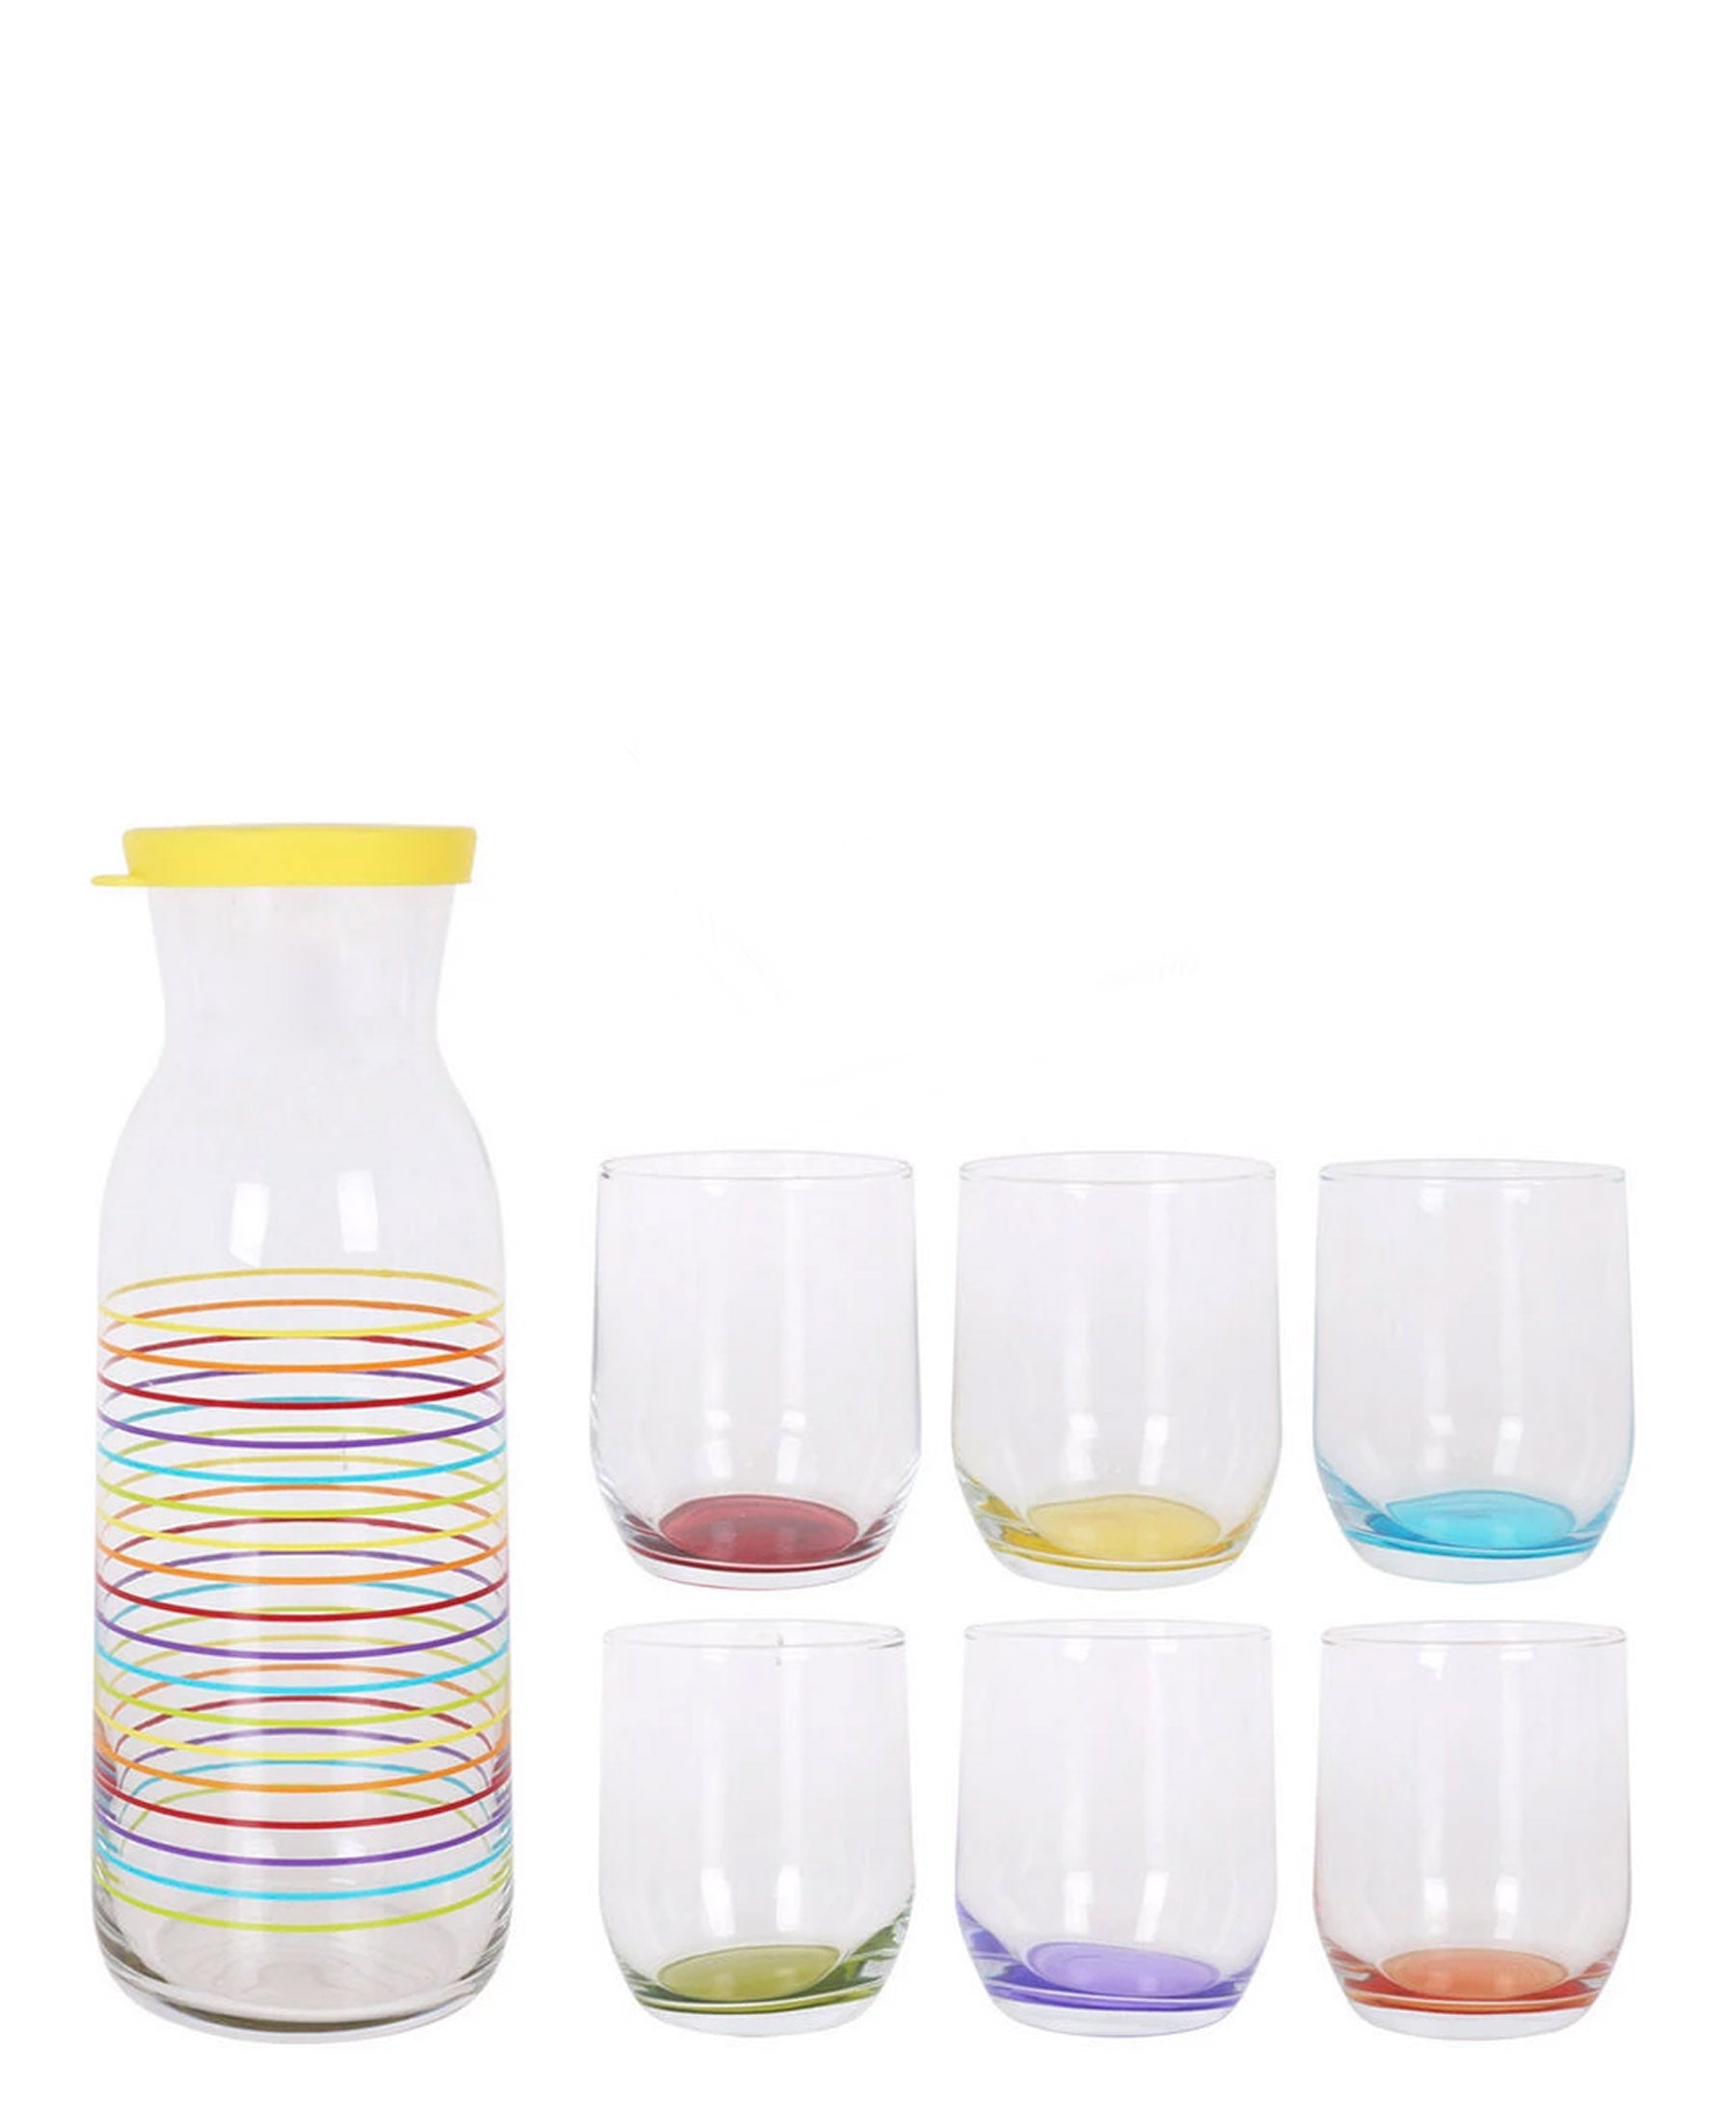 Kitchen Life 7 Piece Glassware Set - Clear With Colourful Print